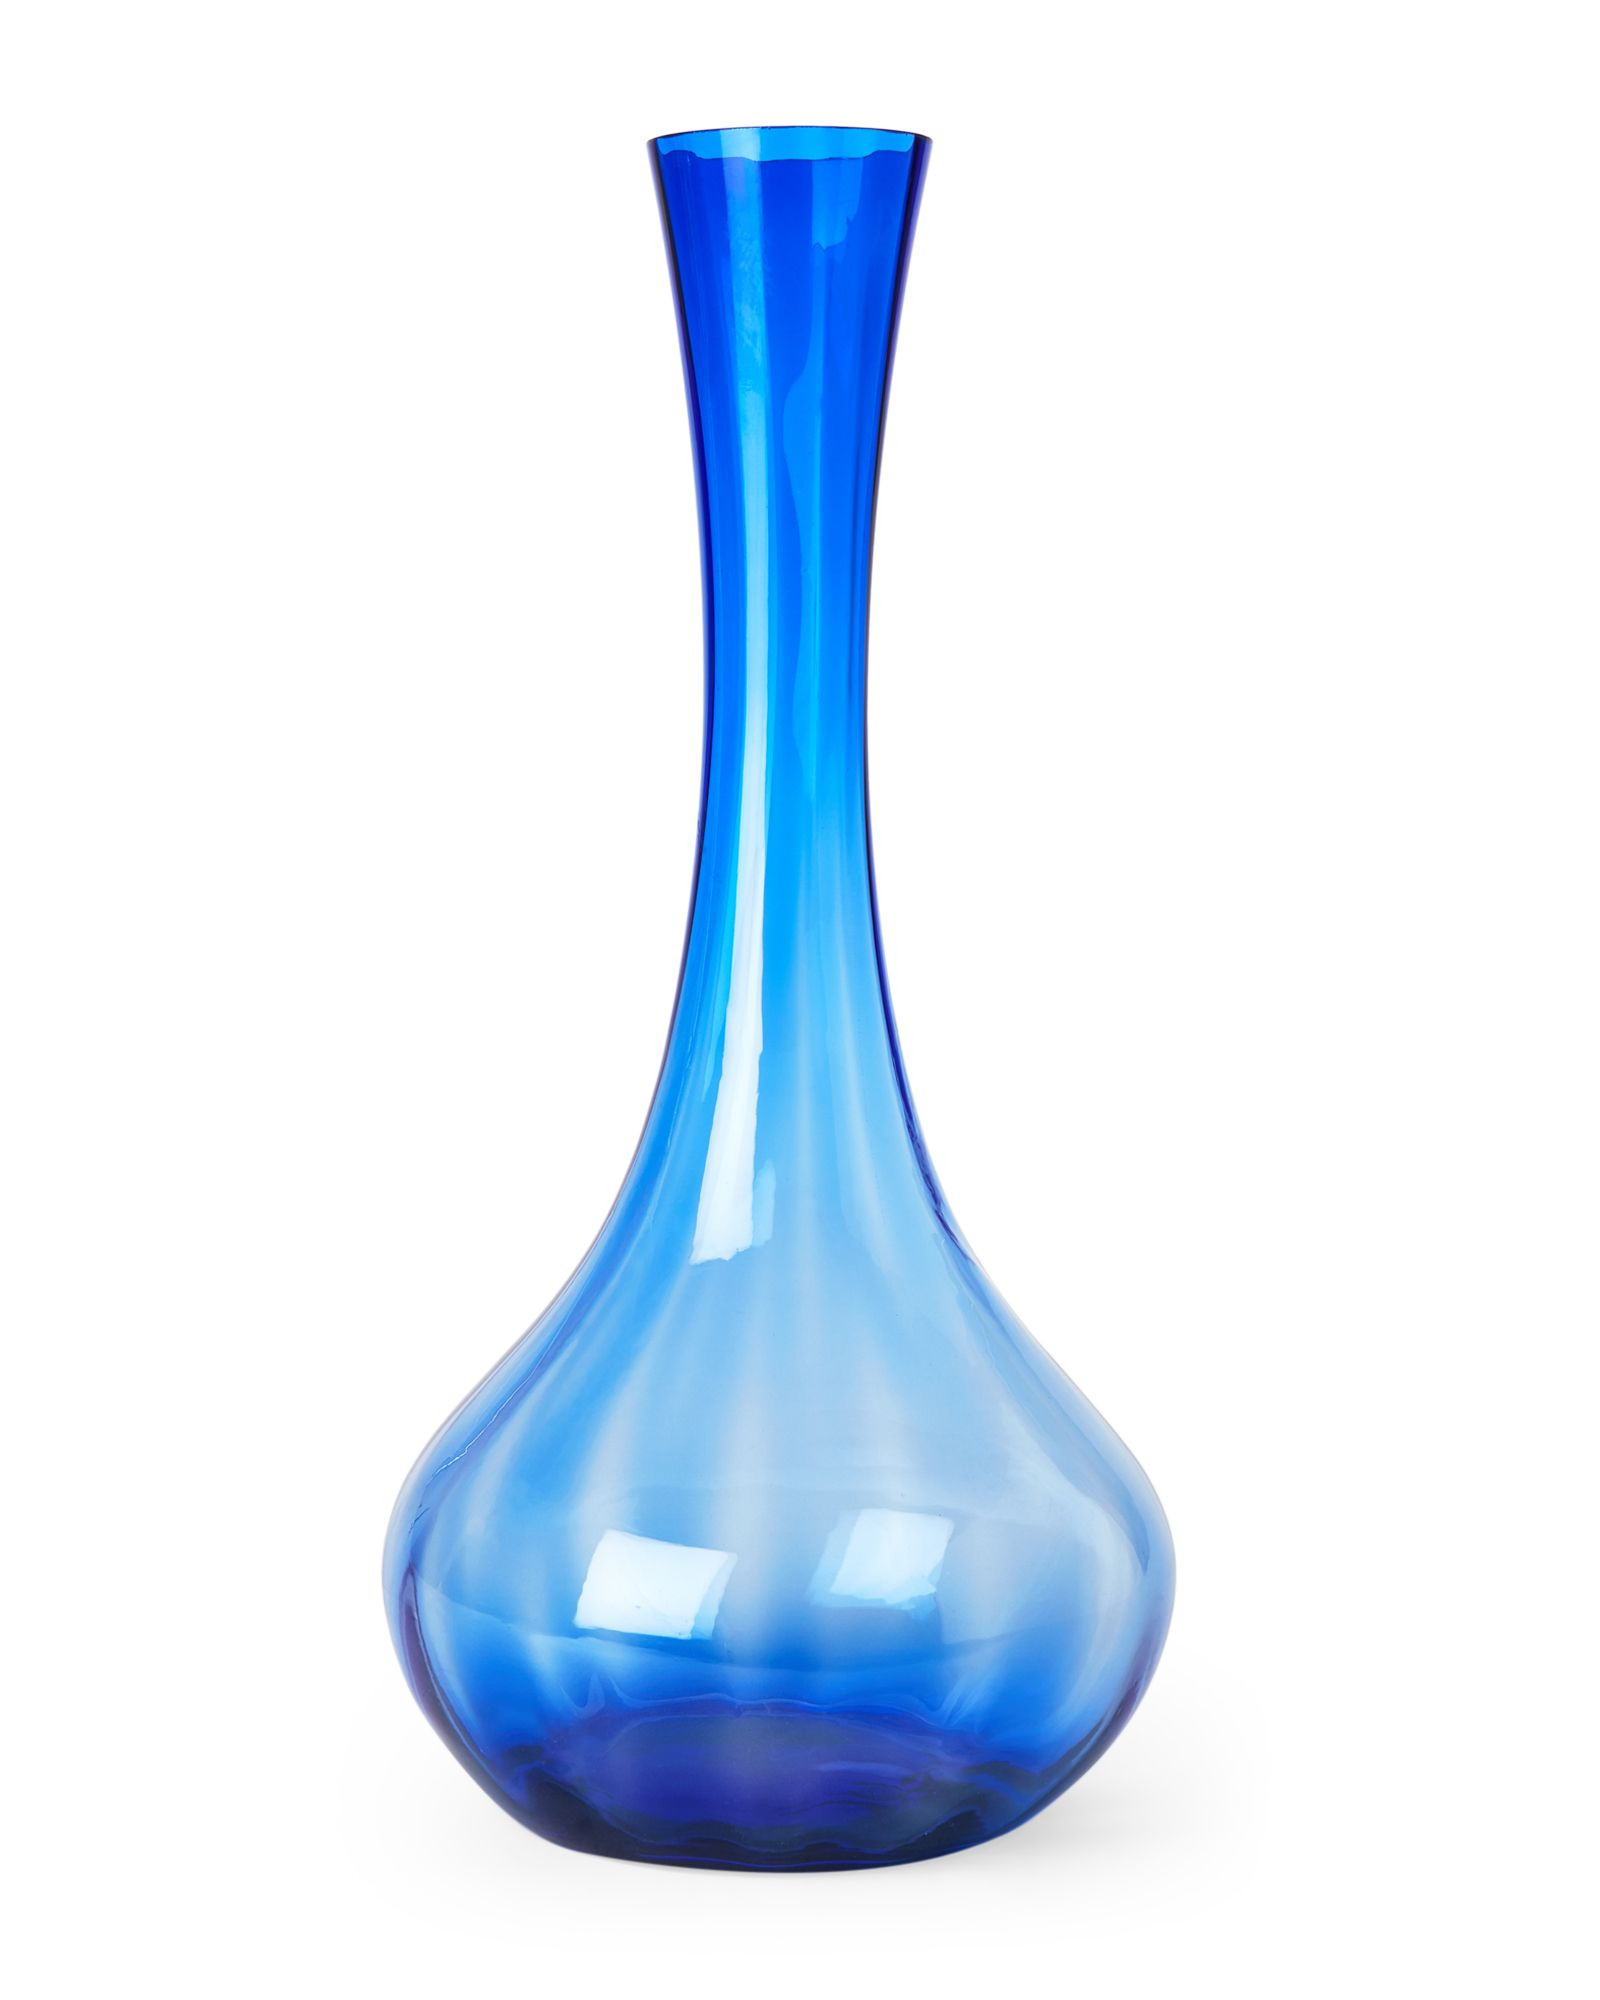 Hanging Glass Rooting Vases Of America Feitian 20 Cobalt Handcrafted Glass Vase Home Garden with America Feitian 20 Cobalt Handcrafted Glass Vase